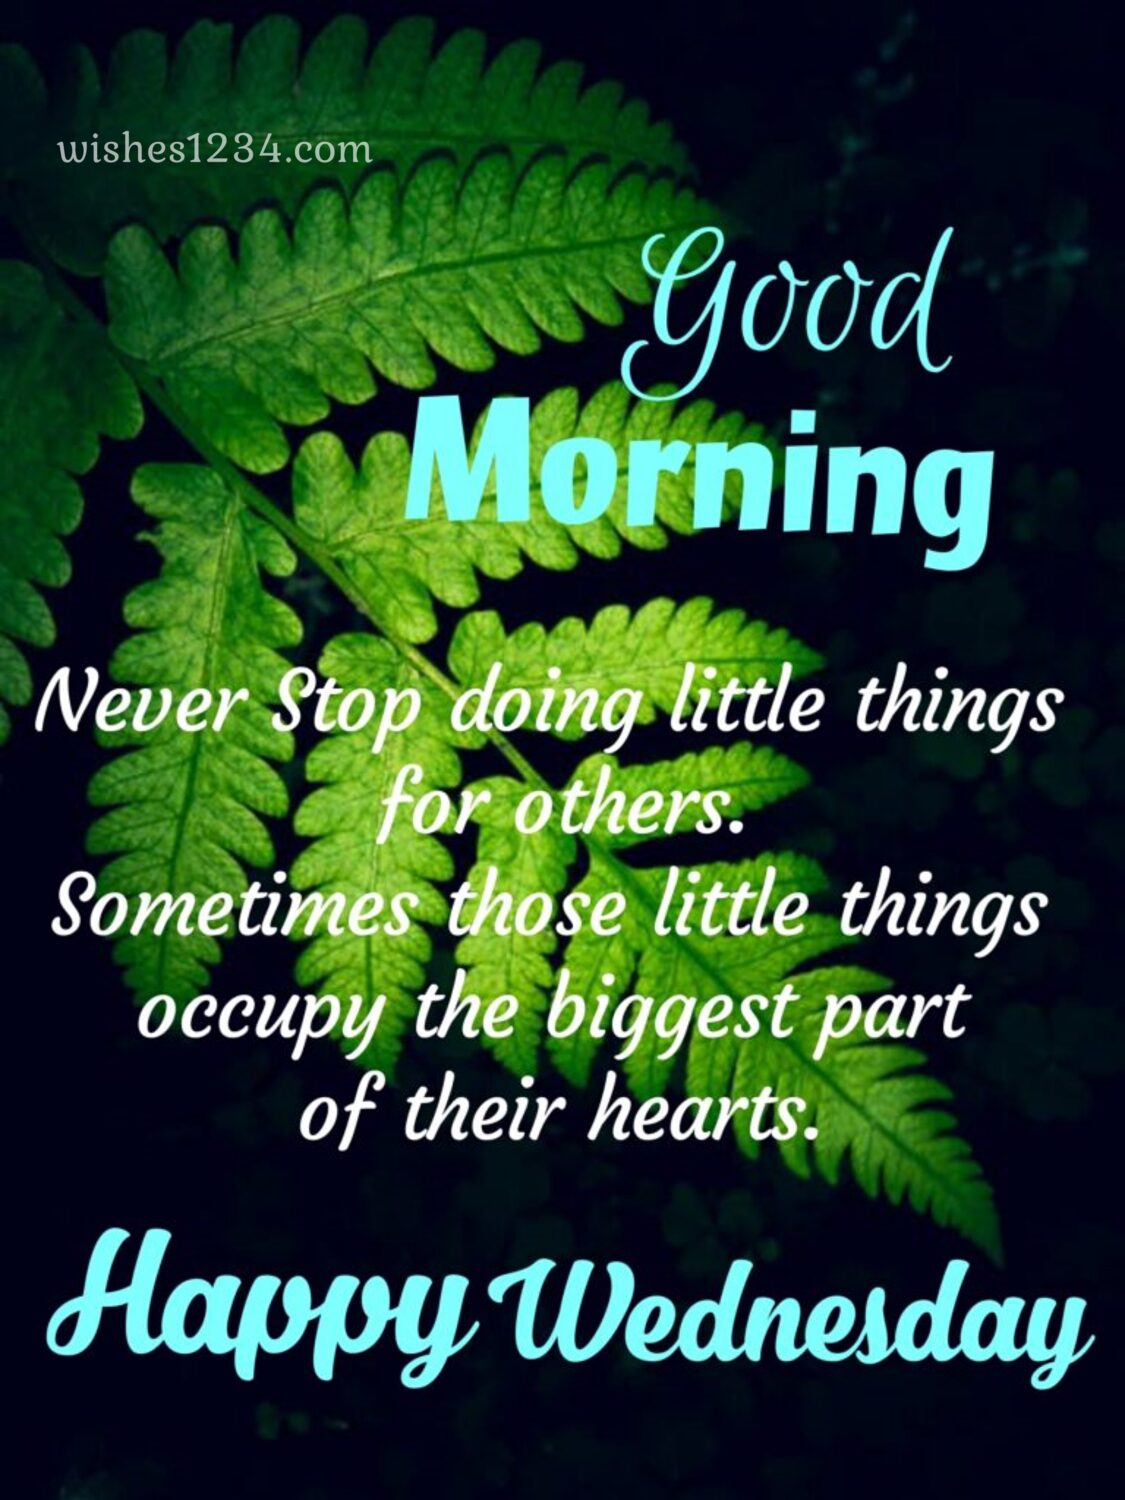 Fern leaf with wednesday quote, Happy Wednesday Images.